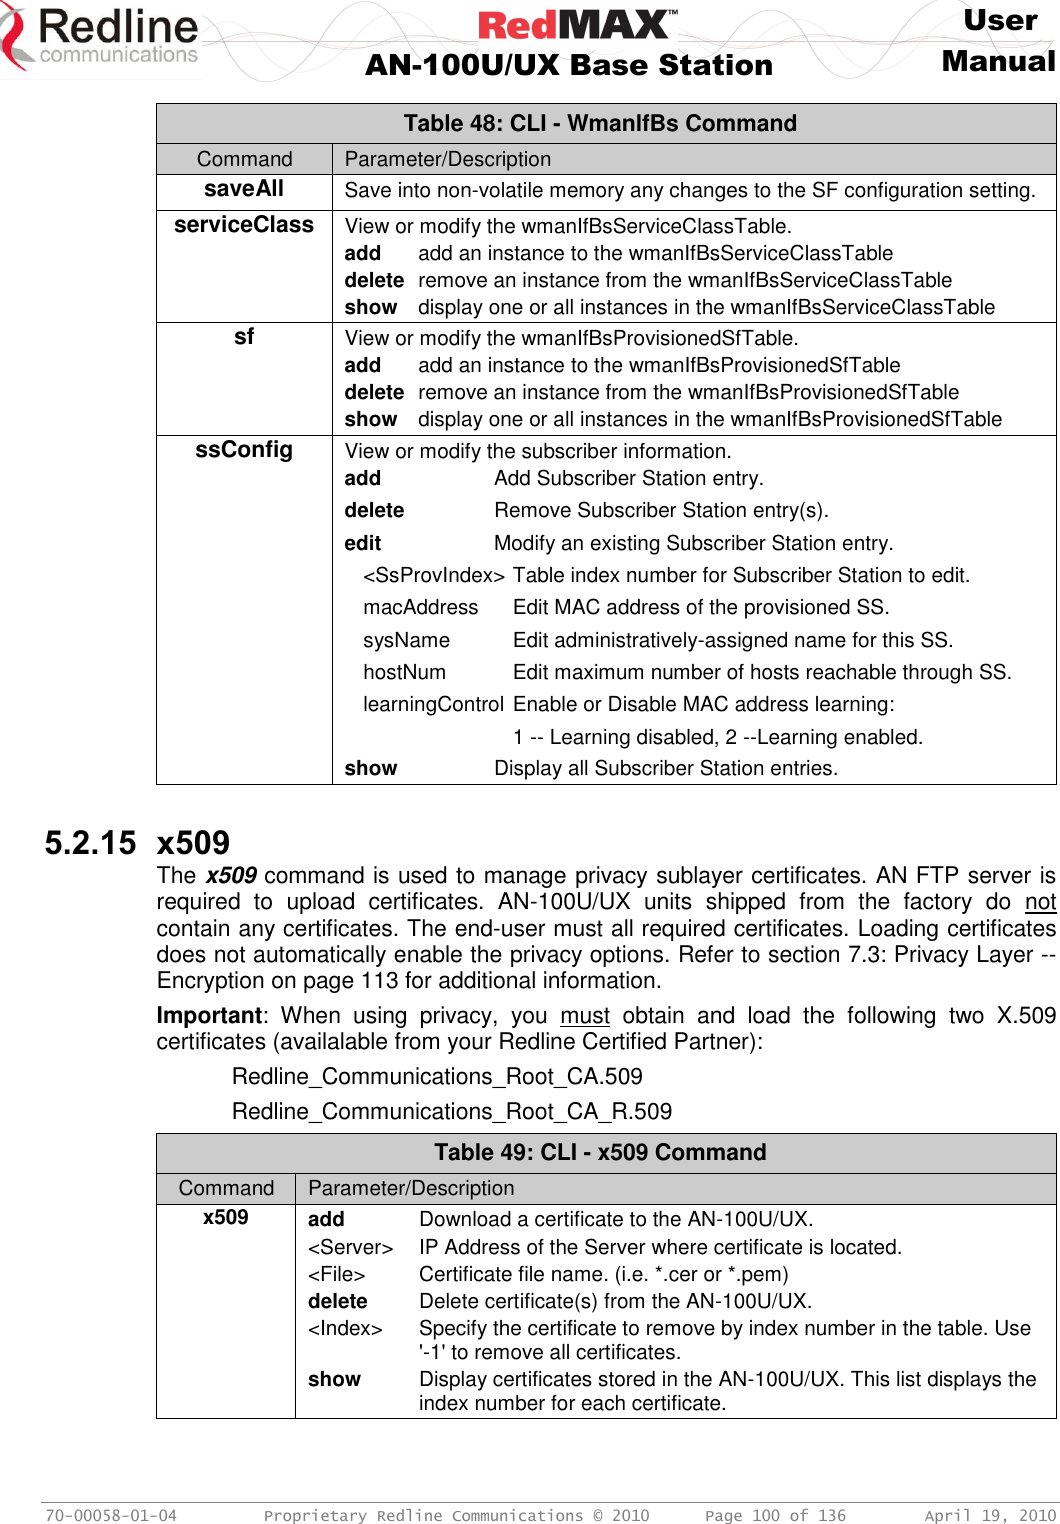     User  AN-100U/UX Base Station Manual   70-00058-01-04  Proprietary Redline Communications © 2010   Page 100 of 136  April 19, 2010 Table 48: CLI - WmanlfBs Command Command Parameter/Description saveAll Save into non-volatile memory any changes to the SF configuration setting. serviceClass View or modify the wmanIfBsServiceClassTable. add  add an instance to the wmanIfBsServiceClassTable delete  remove an instance from the wmanIfBsServiceClassTable show  display one or all instances in the wmanIfBsServiceClassTable sf View or modify the wmanIfBsProvisionedSfTable. add  add an instance to the wmanIfBsProvisionedSfTable delete  remove an instance from the wmanIfBsProvisionedSfTable show  display one or all instances in the wmanIfBsProvisionedSfTable ssConfig View or modify the subscriber information.   add  Add Subscriber Station entry. delete  Remove Subscriber Station entry(s). edit  Modify an existing Subscriber Station entry. &lt;SsProvIndex&gt; Table index number for Subscriber Station to edit. macAddress  Edit MAC address of the provisioned SS. sysName  Edit administratively-assigned name for this SS. hostNum  Edit maximum number of hosts reachable through SS. learningControl Enable or Disable MAC address learning:  1 -- Learning disabled, 2 --Learning enabled. show  Display all Subscriber Station entries.  5.2.15 x509 The x509 command is used to manage privacy sublayer certificates. AN FTP server is required  to  upload  certificates.  AN-100U/UX  units  shipped  from  the  factory  do  not contain any certificates. The end-user must all required certificates. Loading certificates does not automatically enable the privacy options. Refer to section 7.3: Privacy Layer -- Encryption on page 113 for additional information. Important:  When  using  privacy,  you  must  obtain  and  load  the  following  two  X.509 certificates (availalable from your Redline Certified Partner):   Redline_Communications_Root_CA.509   Redline_Communications_Root_CA_R.509 Table 49: CLI - x509 Command Command Parameter/Description x509 add  Download a certificate to the AN-100U/UX. &lt;Server&gt;  IP Address of the Server where certificate is located. &lt;File&gt;  Certificate file name. (i.e. *.cer or *.pem) delete  Delete certificate(s) from the AN-100U/UX. &lt;Index&gt;  Specify the certificate to remove by index number in the table. Use &apos;-1&apos; to remove all certificates. show  Display certificates stored in the AN-100U/UX. This list displays the index number for each certificate.   